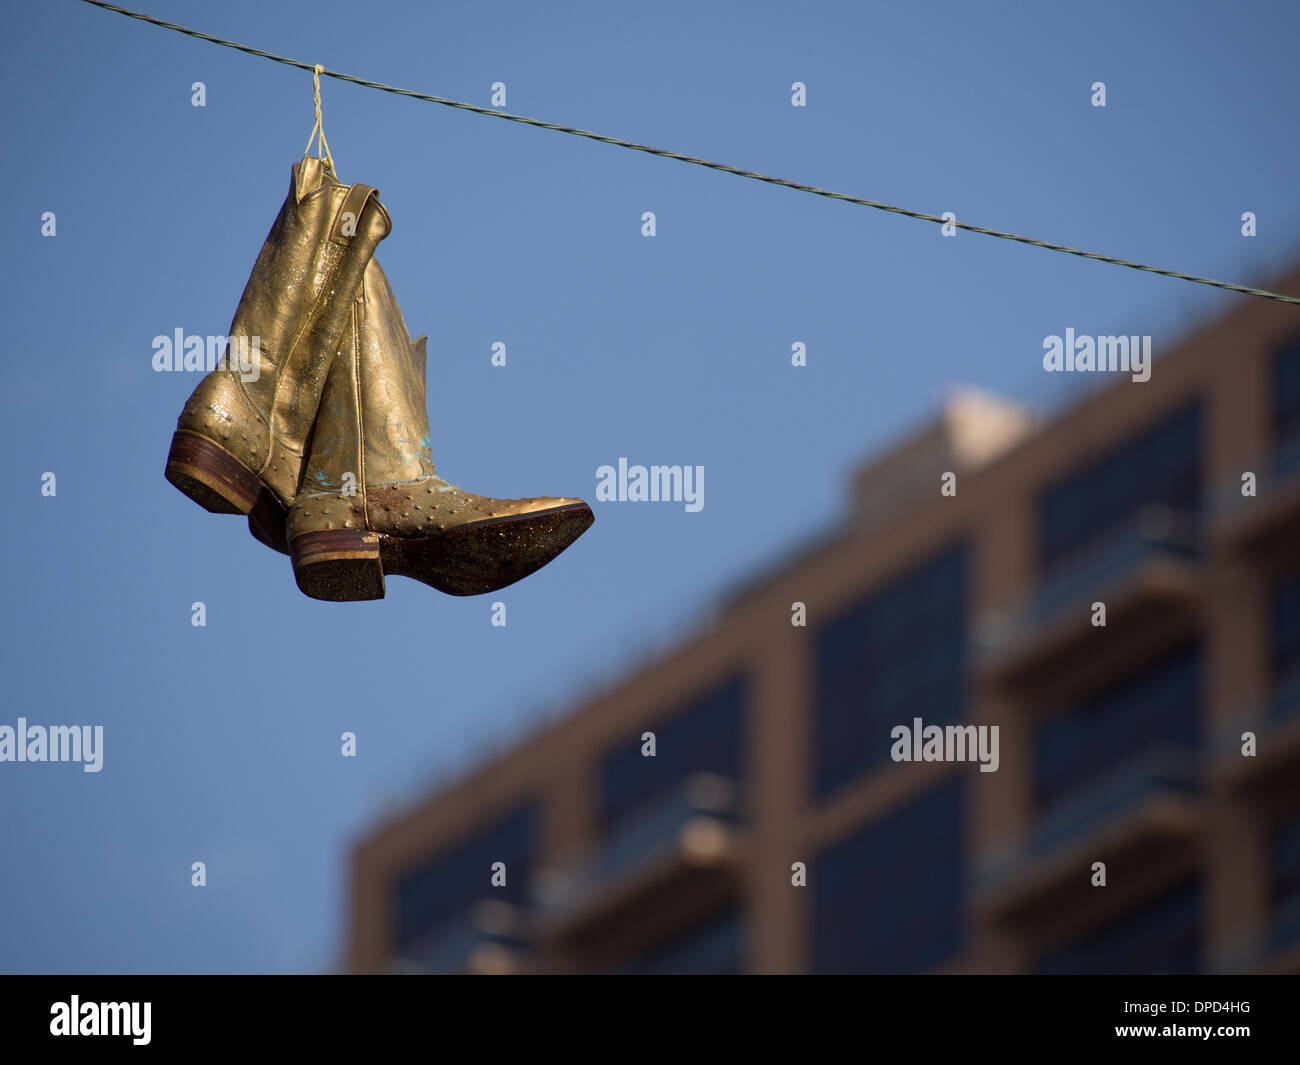 Golden cowboy boots hanging from an electrical line Stock Photo